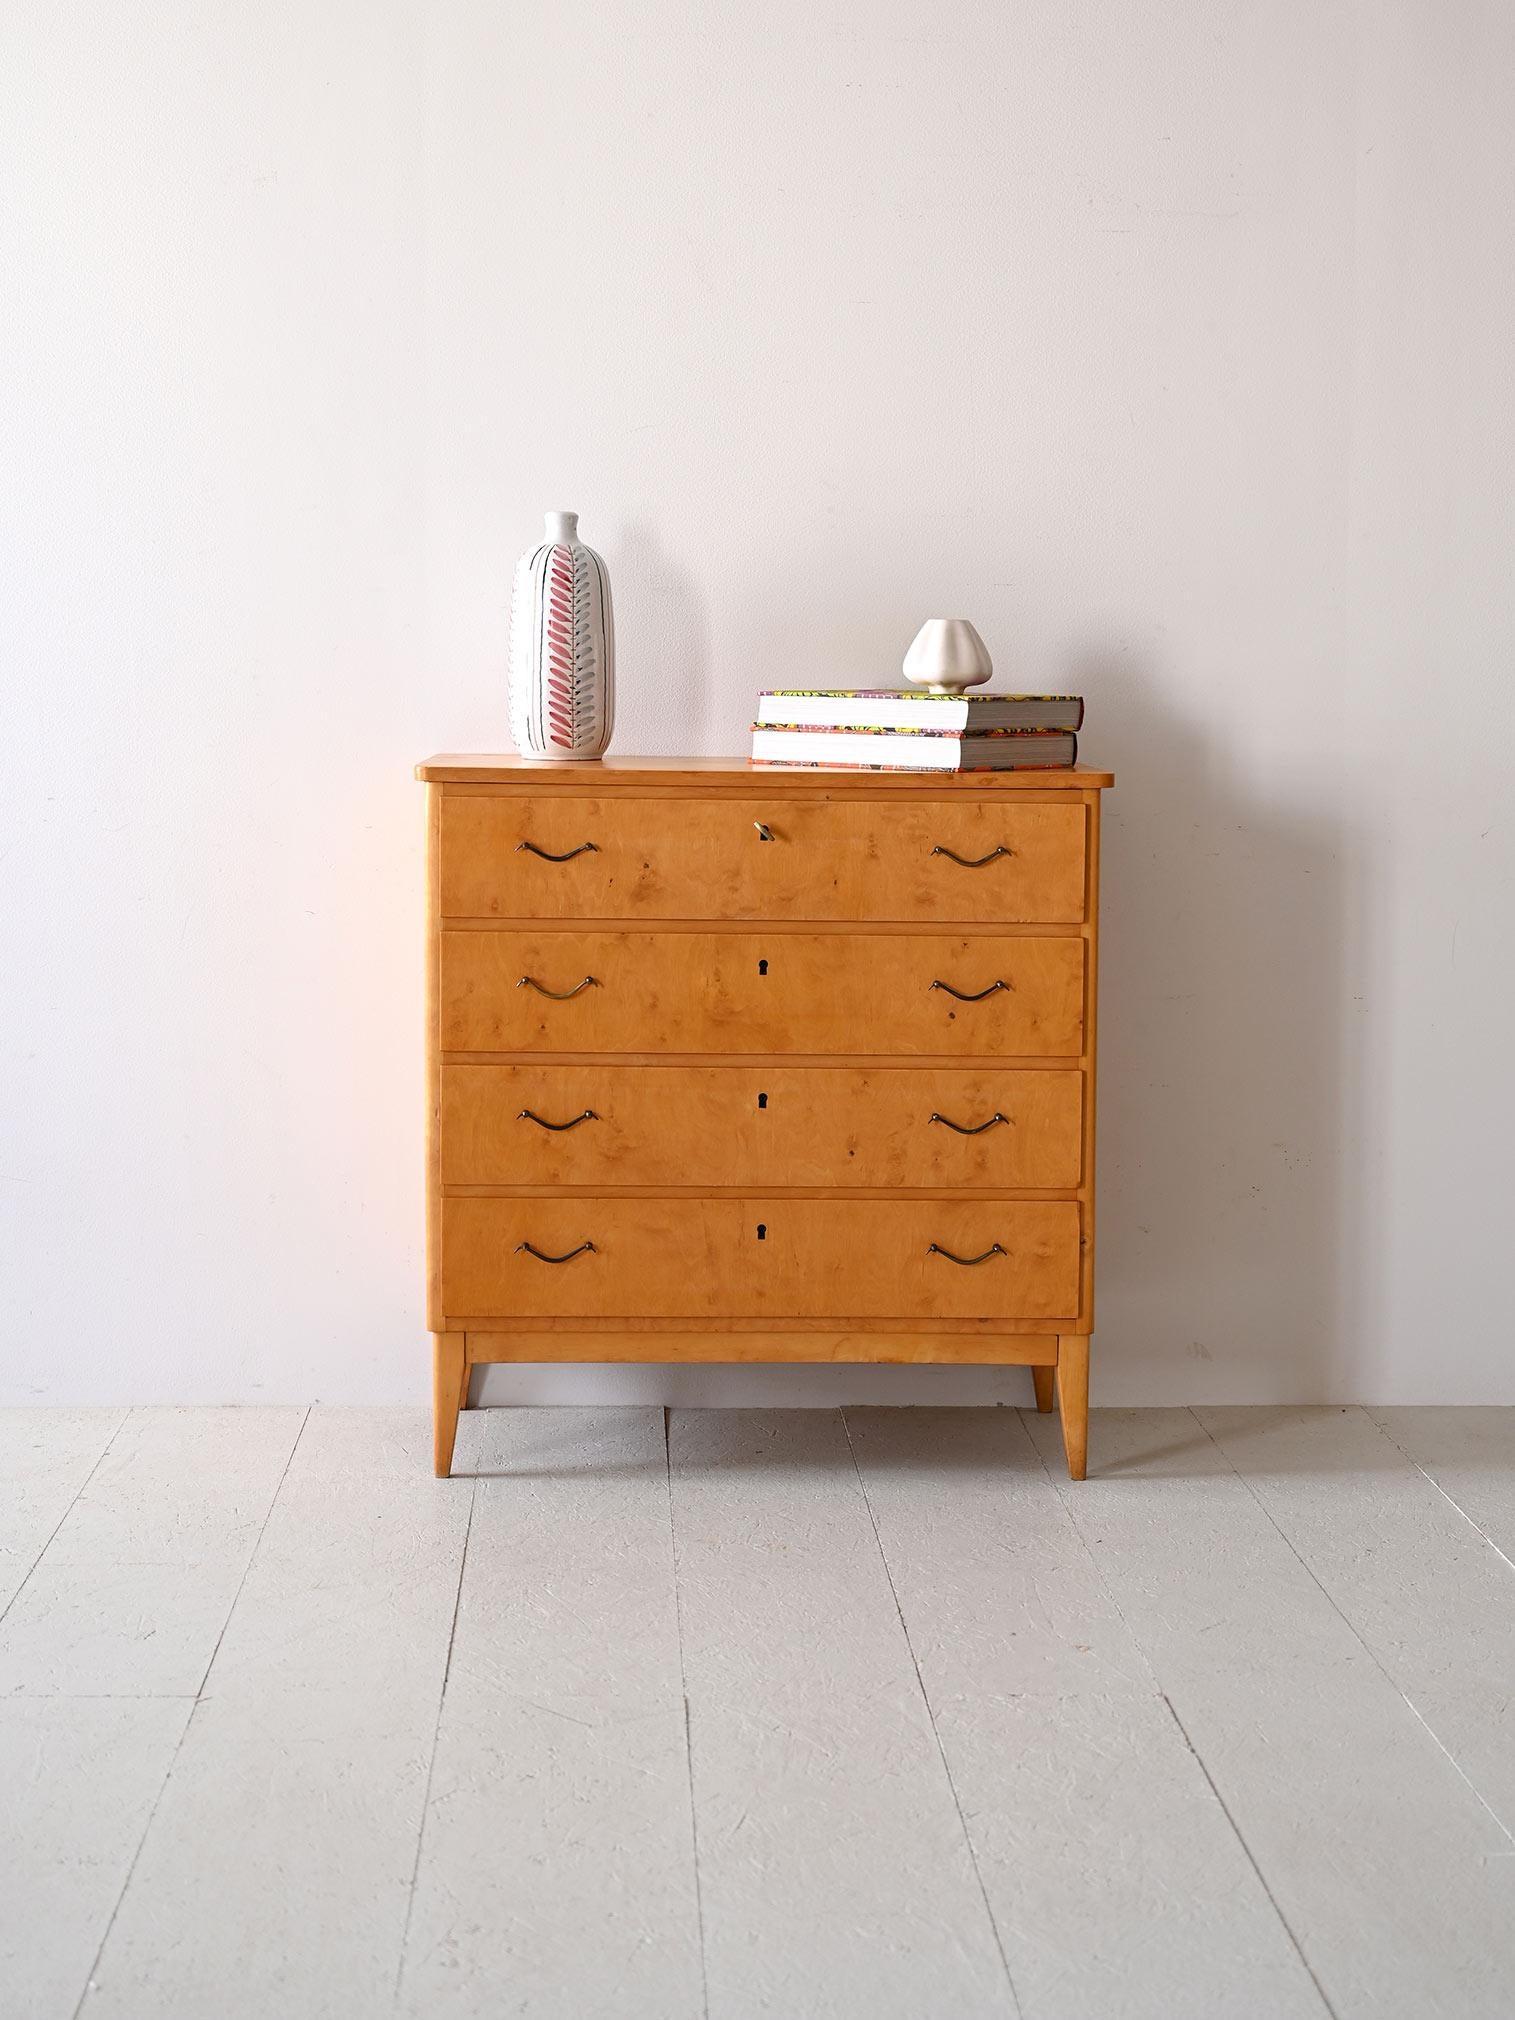 This 1950s Scandinavian chest of drawers, made of birch wood, has a functional look with its metal handles that stand out against a smooth surface. With a classic rectangular silhouette and angled legs, the cabinet offers an effective, no-frills